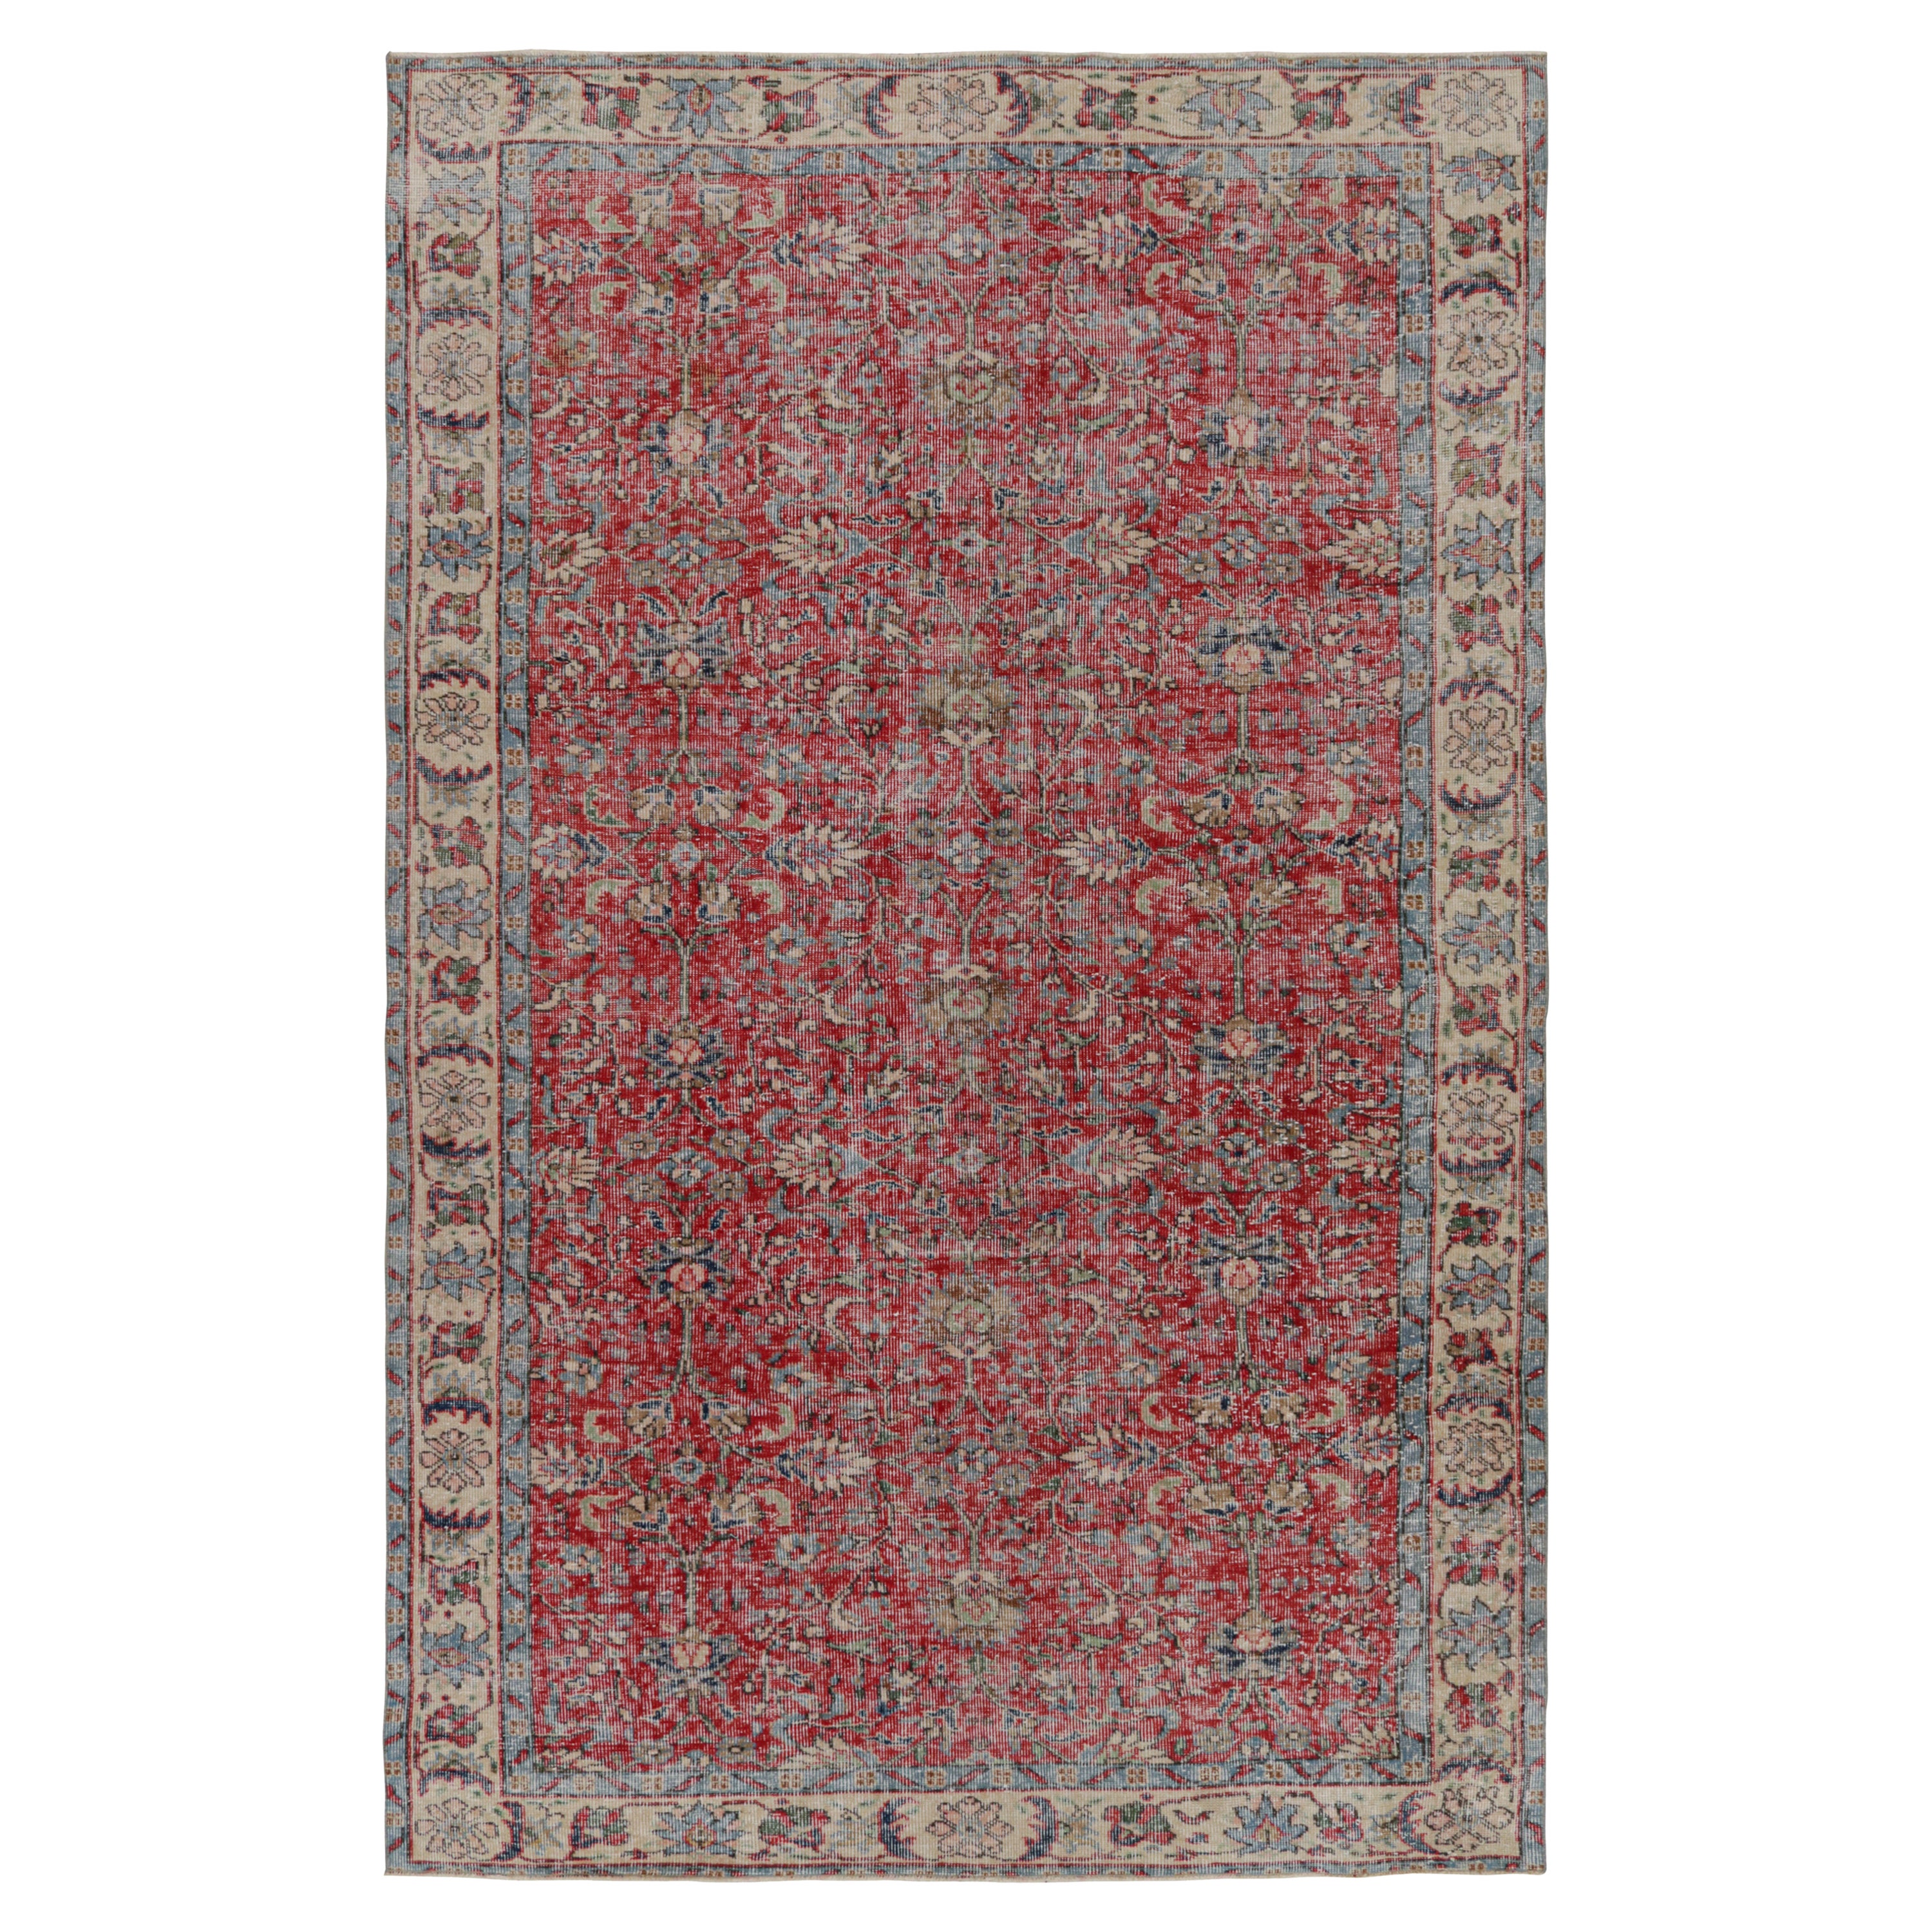 Vintage Turkish Rug in Red with Floral Patterns, from Rug & Kilim